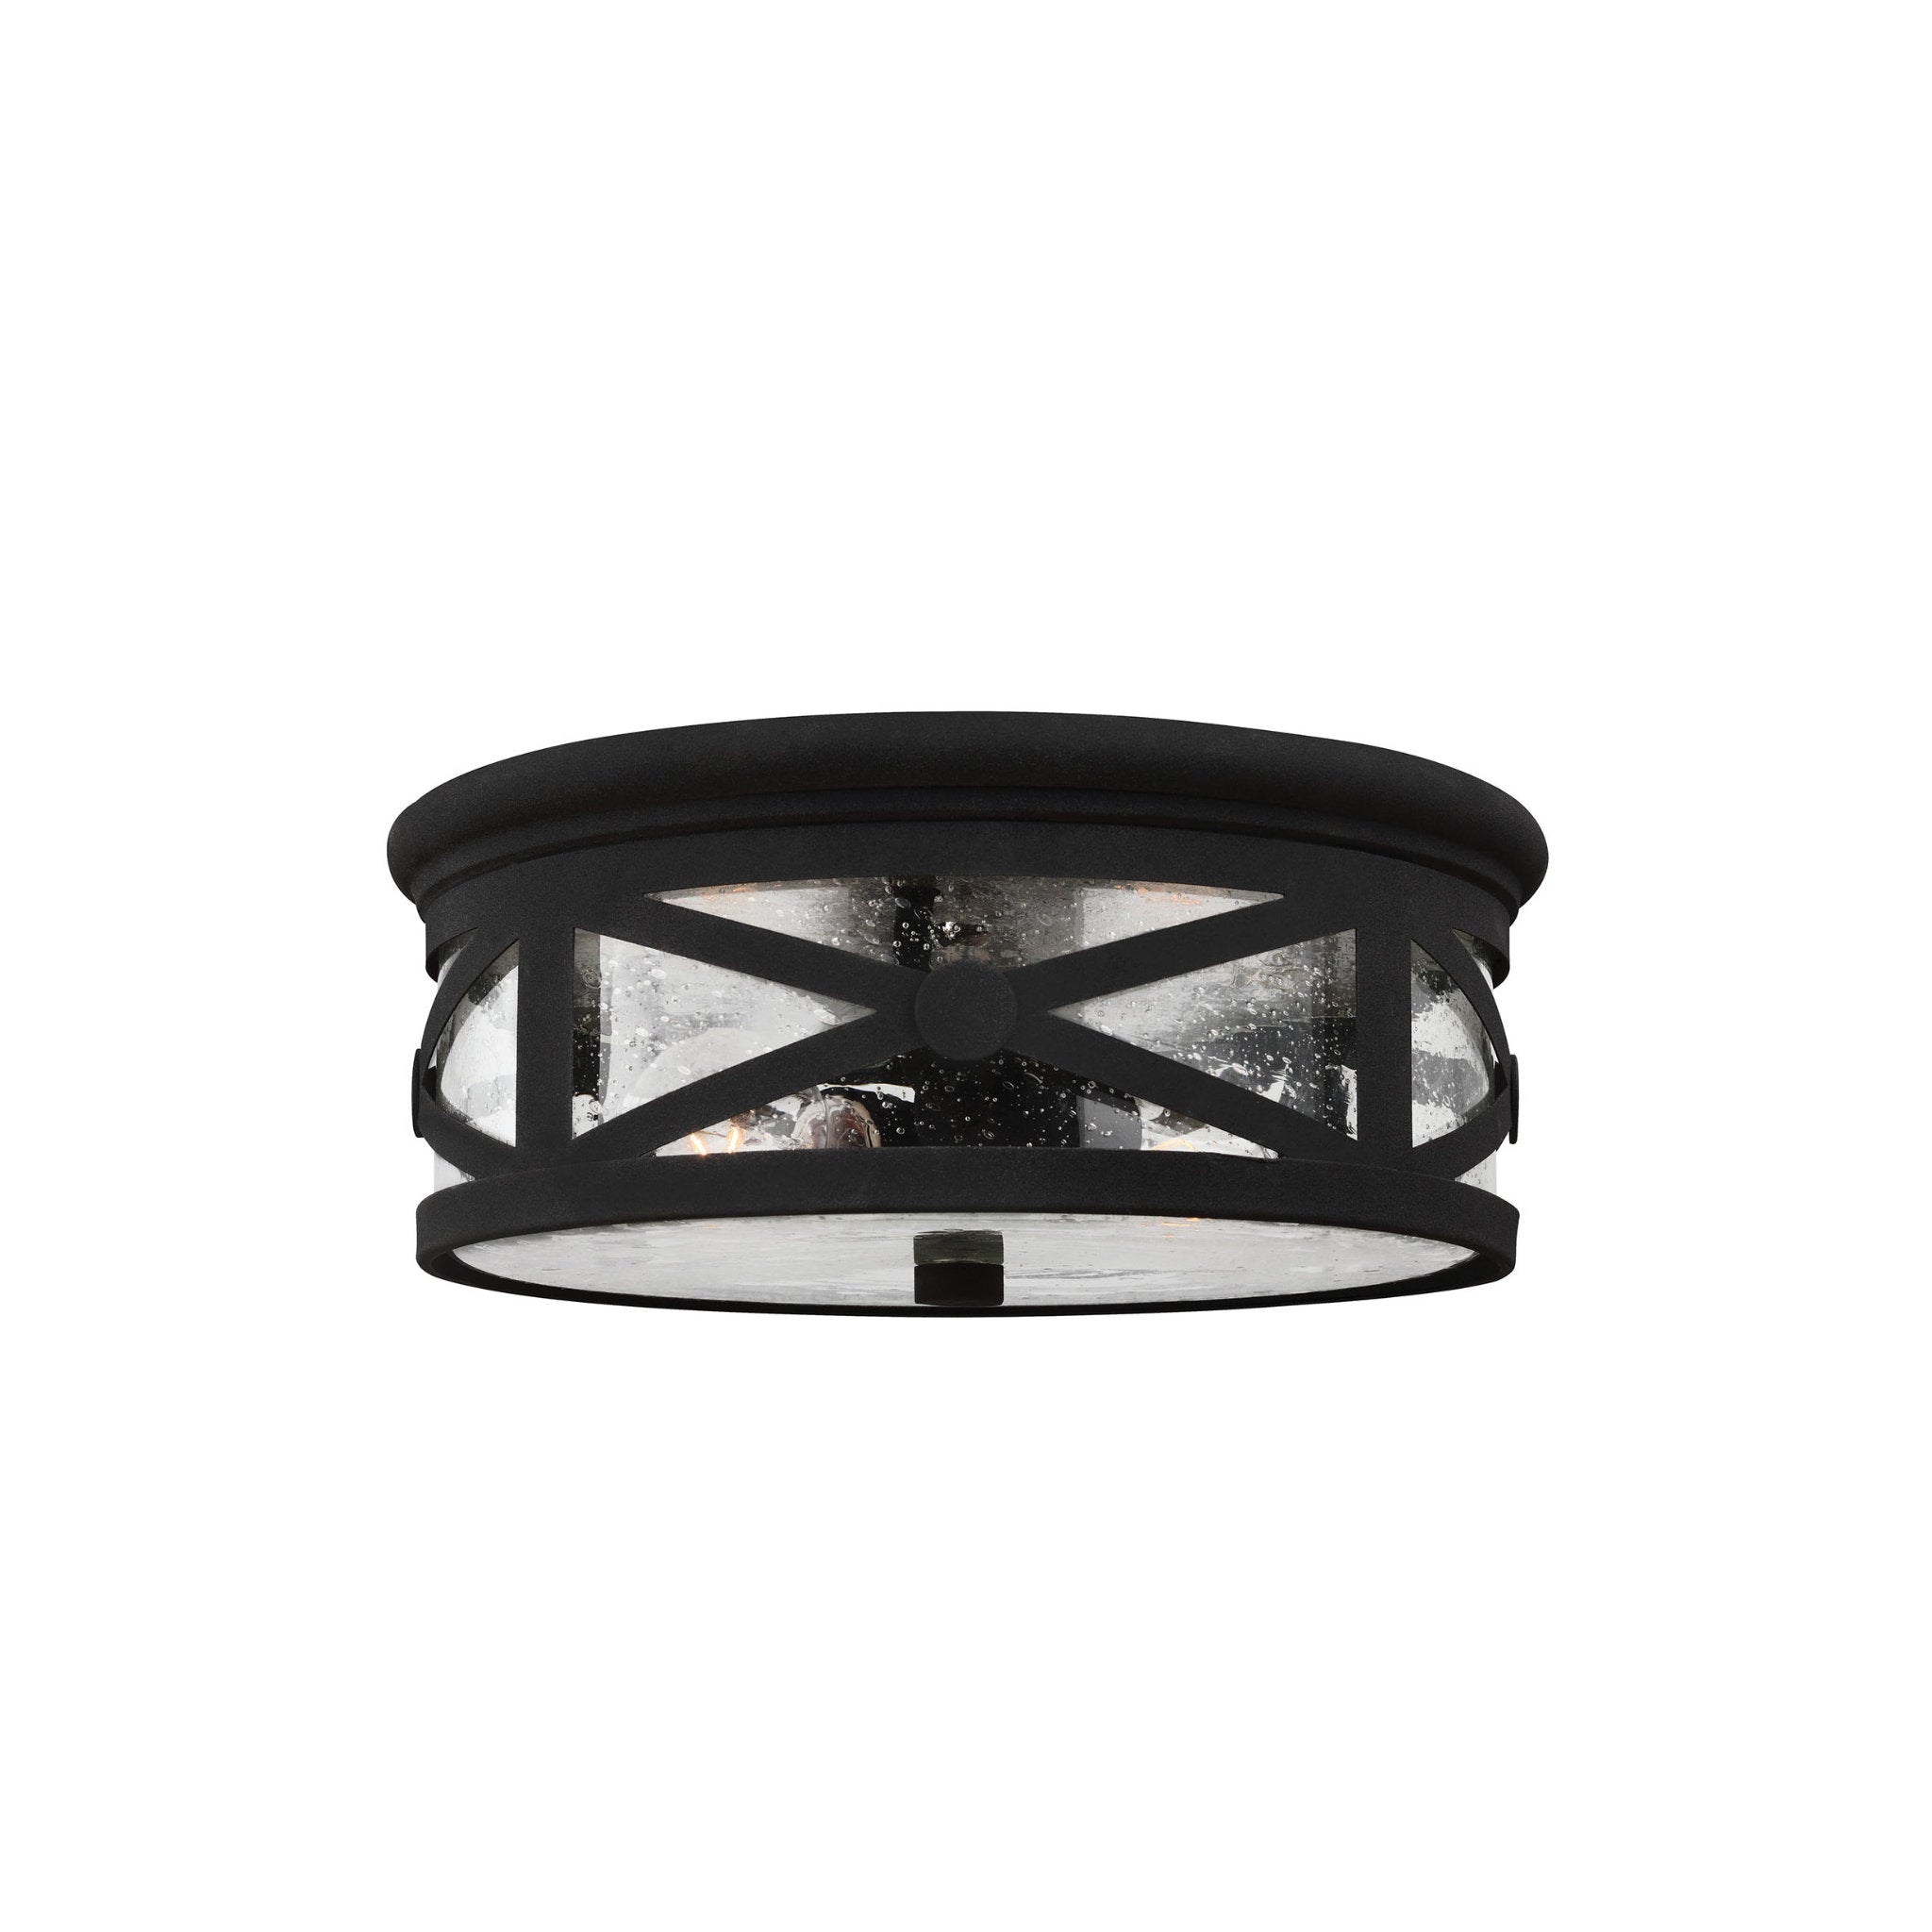 Two Light Outdoor Ceiling Flush Mount Traditional Fixture 5.5" Height Aluminum Round Clear Seeded Shade in Black